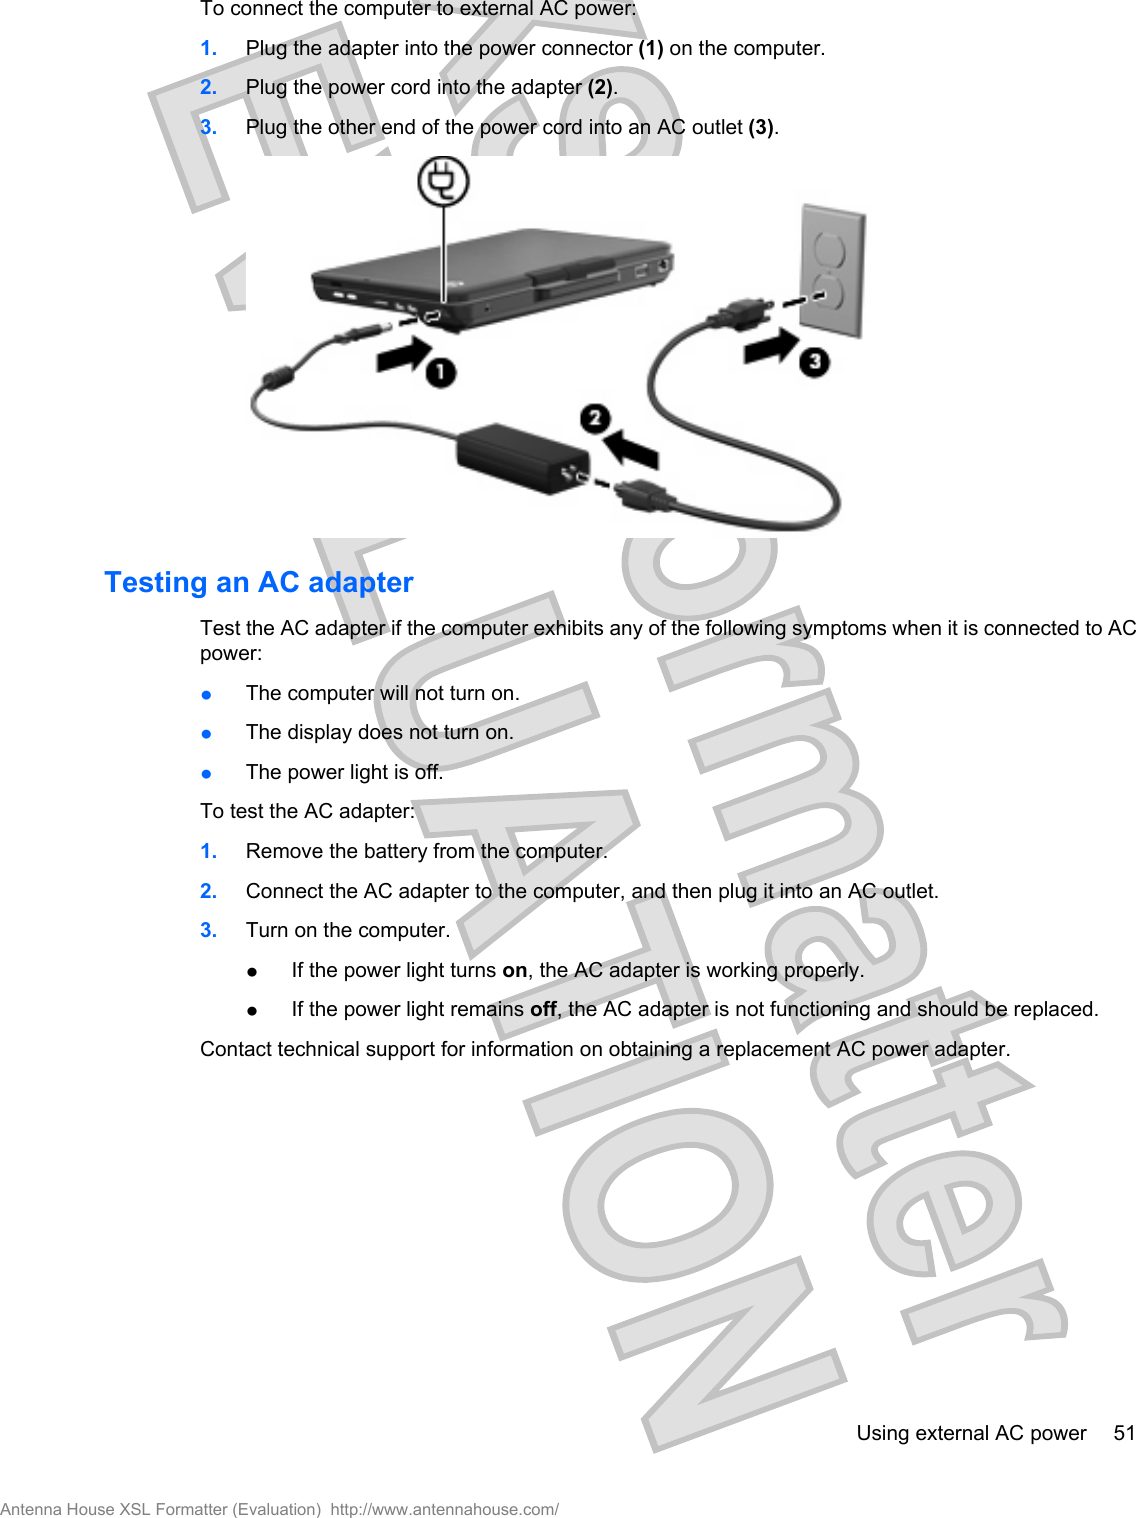 To connect the computer to external AC power:1. Plug the adapter into the power connector (1) on the computer.2. Plug the power cord into the adapter (2).3. Plug the other end of the power cord into an AC outlet (3).Testing an AC adapterTest the AC adapter if the computer exhibits any of the following symptoms when it is connected to ACpower:łThe computer will not turn on.łThe display does not turn on.łThe power light is off.To test the AC adapter:1. Remove the battery from the computer.2. Connect the AC adapter to the computer, and then plug it into an AC outlet.3. Turn on the computer.łIf the power light turns on, the AC adapter is working properly.łIf the power light remains off, the AC adapter is not functioning and should be replaced.Contact technical support for information on obtaining a replacement AC power adapter.Using external AC power 51Antenna House XSL Formatter (Evaluation)  http://www.antennahouse.com/